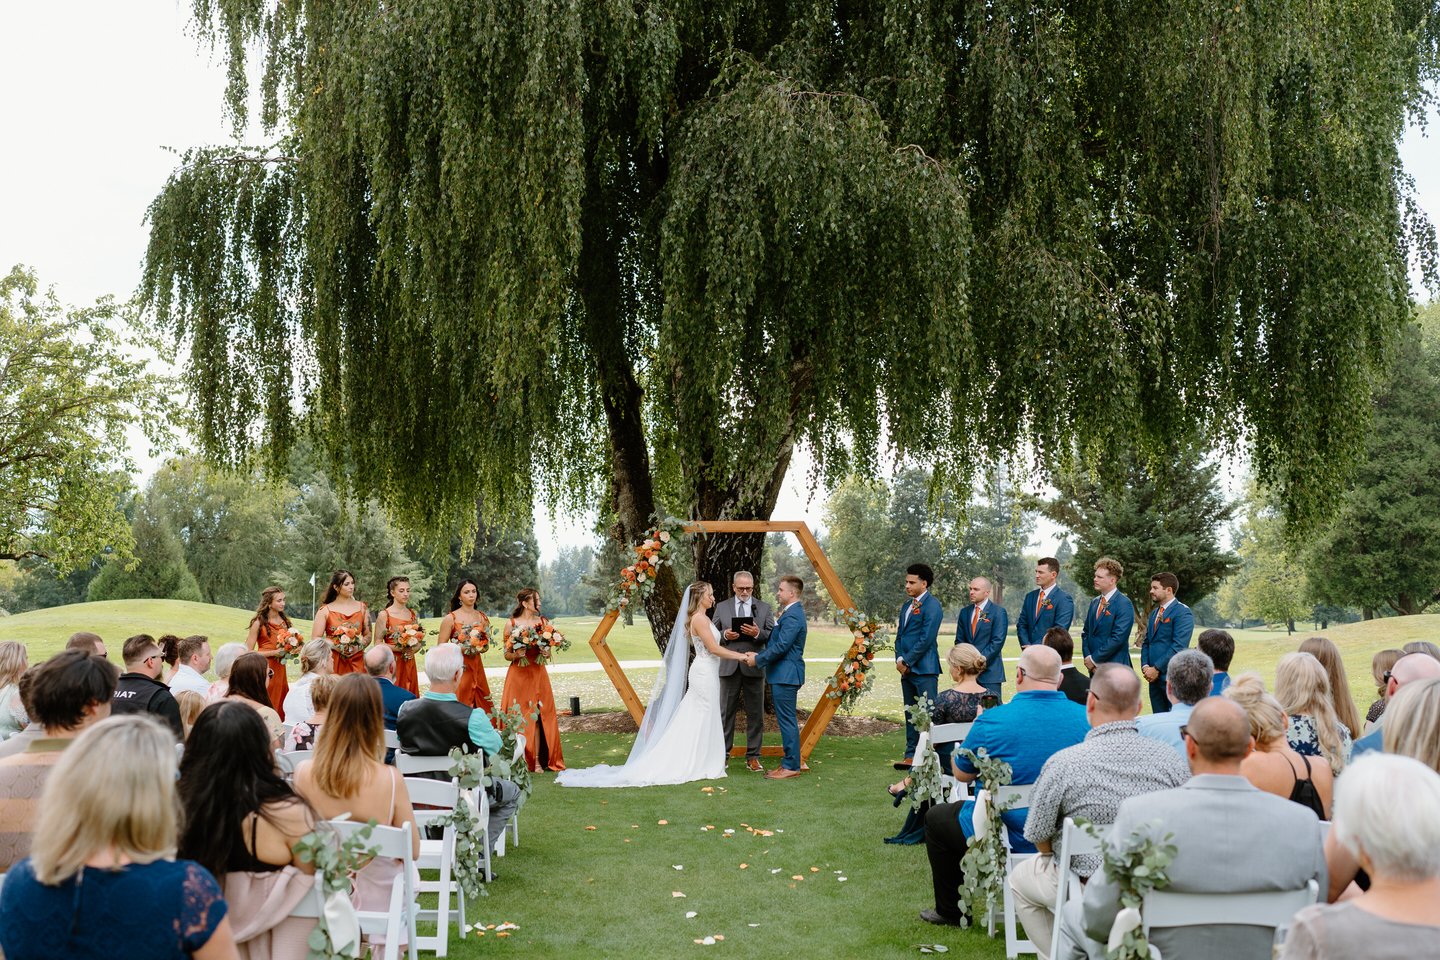 Wedding ceremony under the willow tree at Shadow Hills Country Club